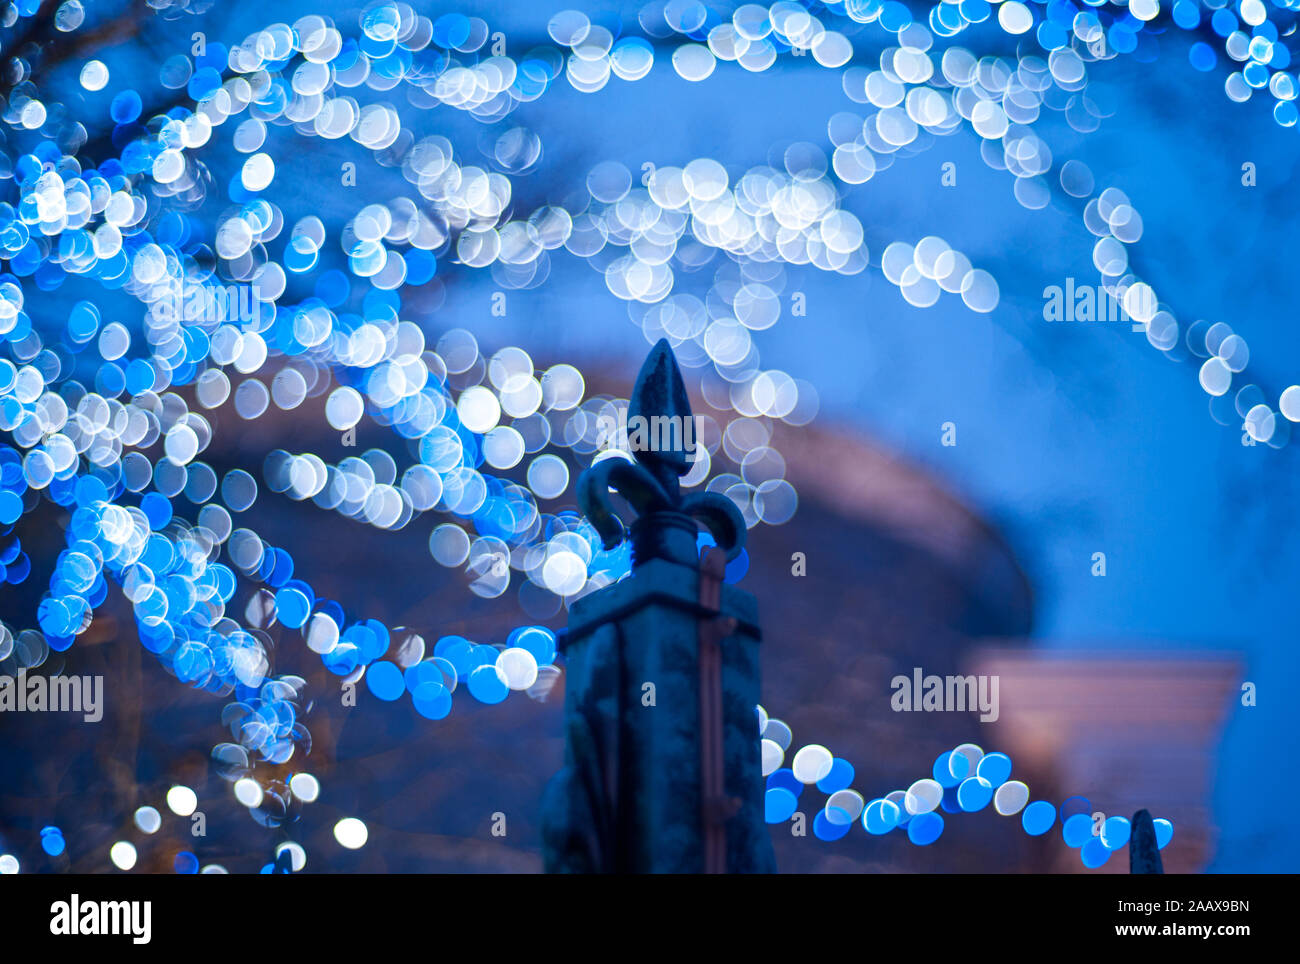 Iron fleur de lis, French lily fence with blue lights bokeh background. Stock Photo